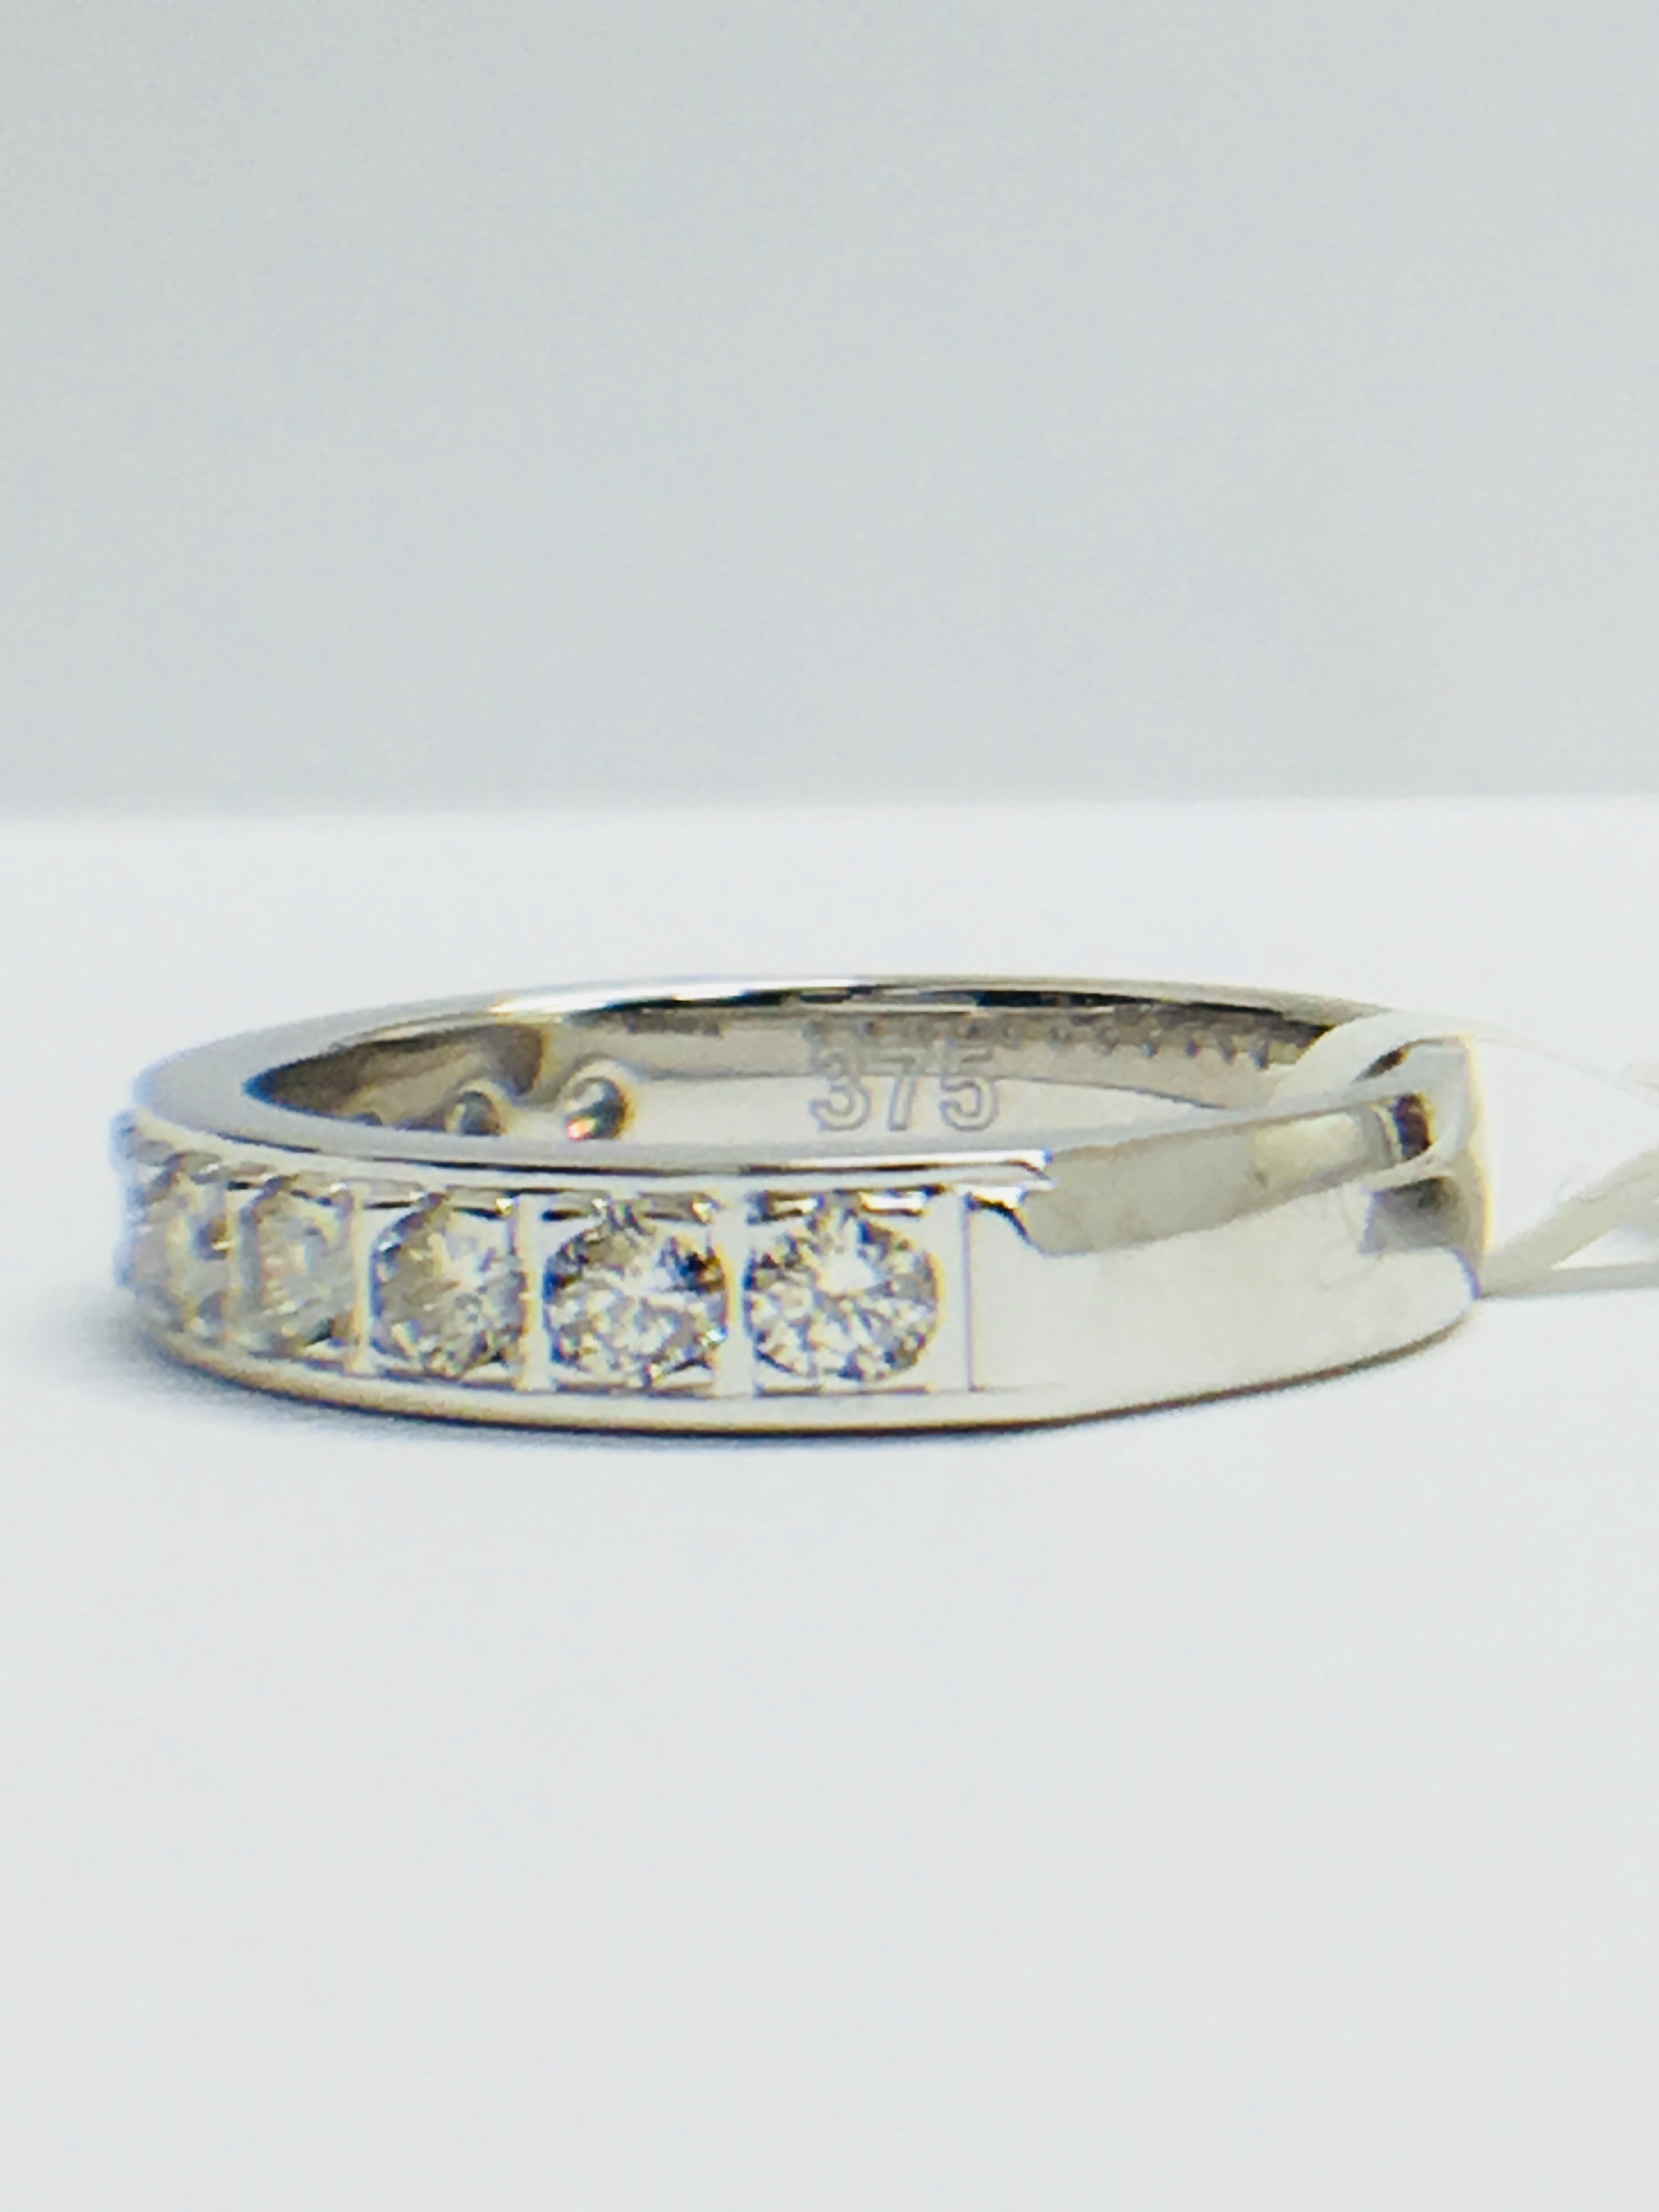 9ct white gold Eternity Ring - Image 3 of 6